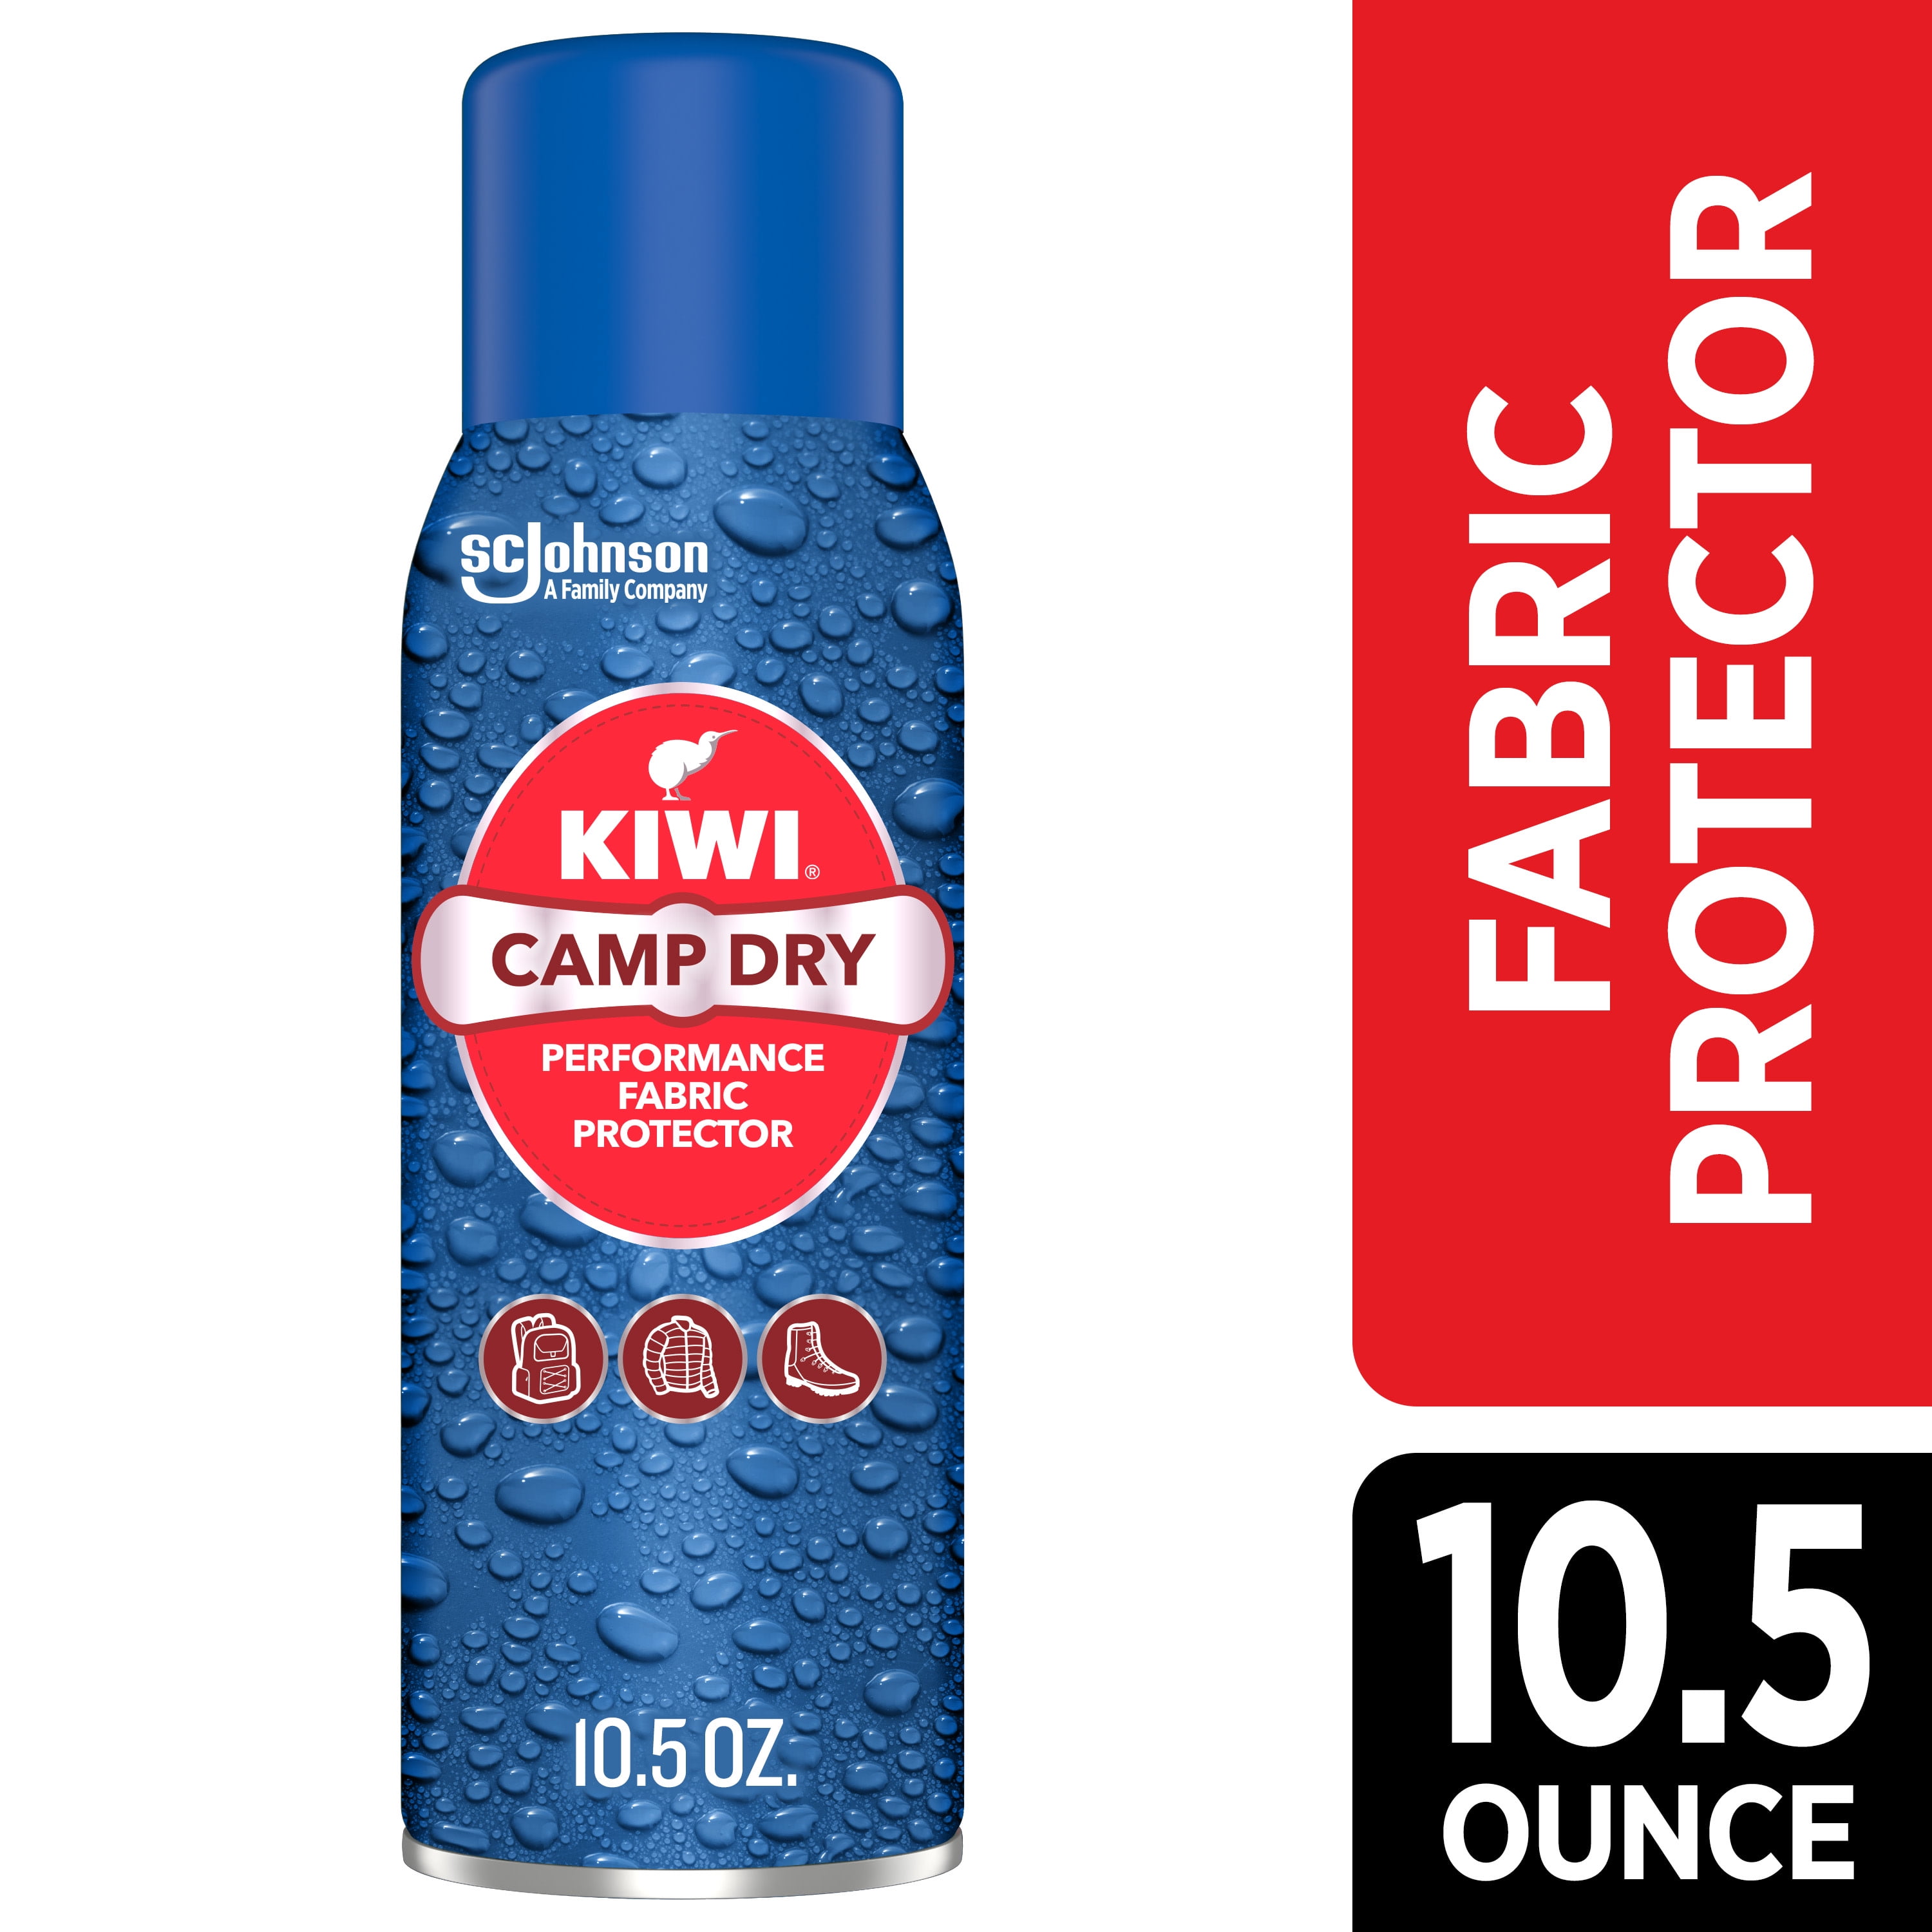 KIWI Camp Dry Performance Fabric Protector Spray, Restores Water Repellent and Provides Fabric Protection (Aerosol), 10.5 oz, 1 ct